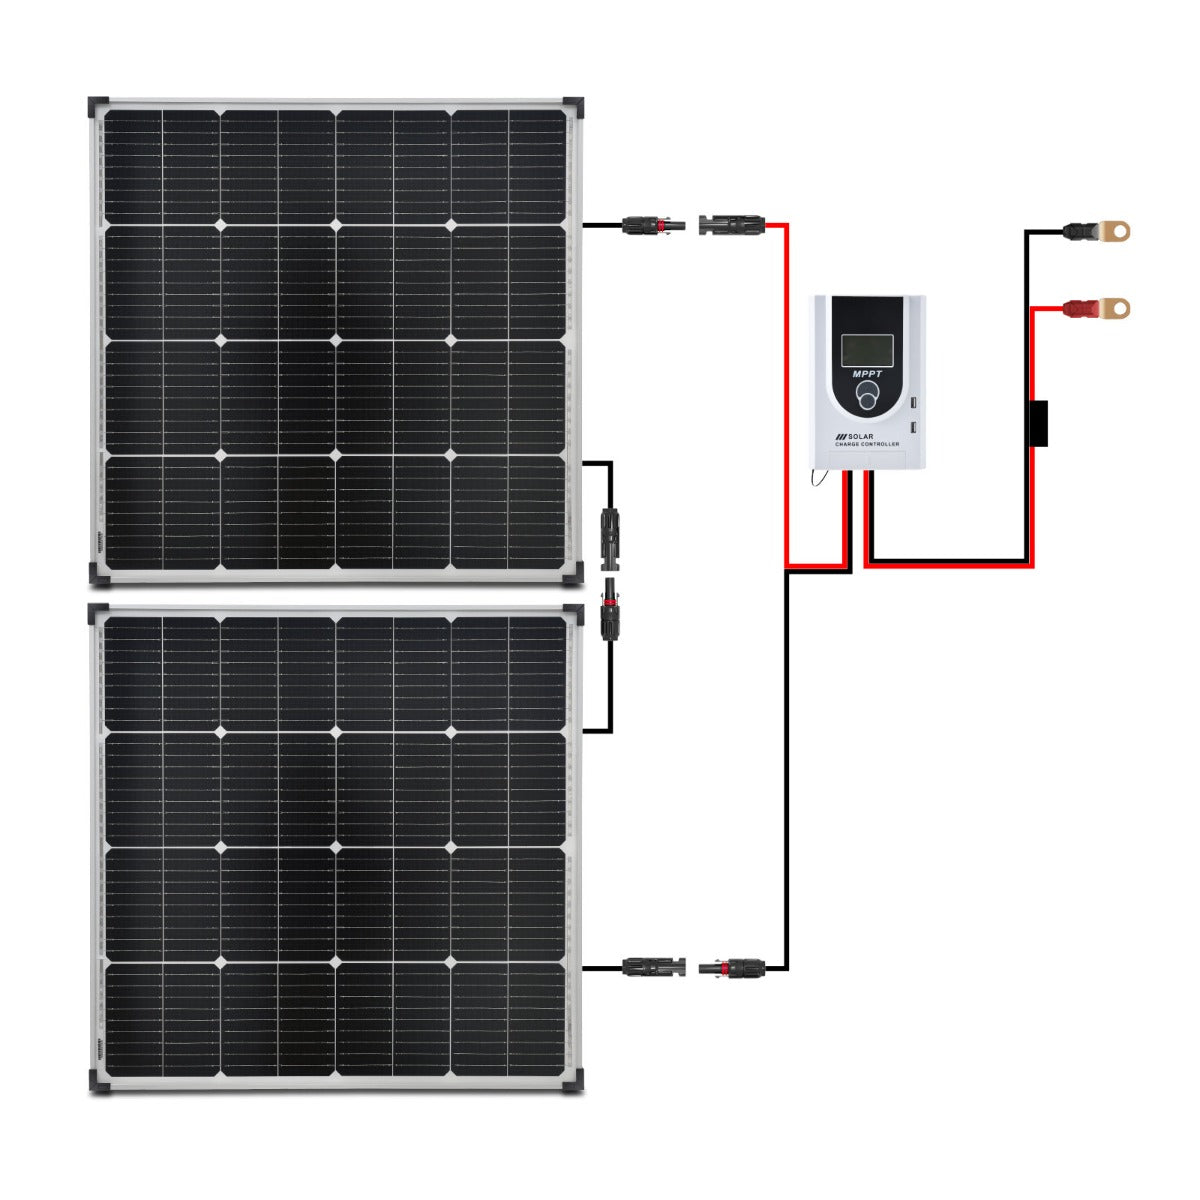 BUNDLE DEAL - LiFePO4 Battery Charging Kit 2x 100W Solar Panel 20A MPPT Controller Bluetooth with Cable